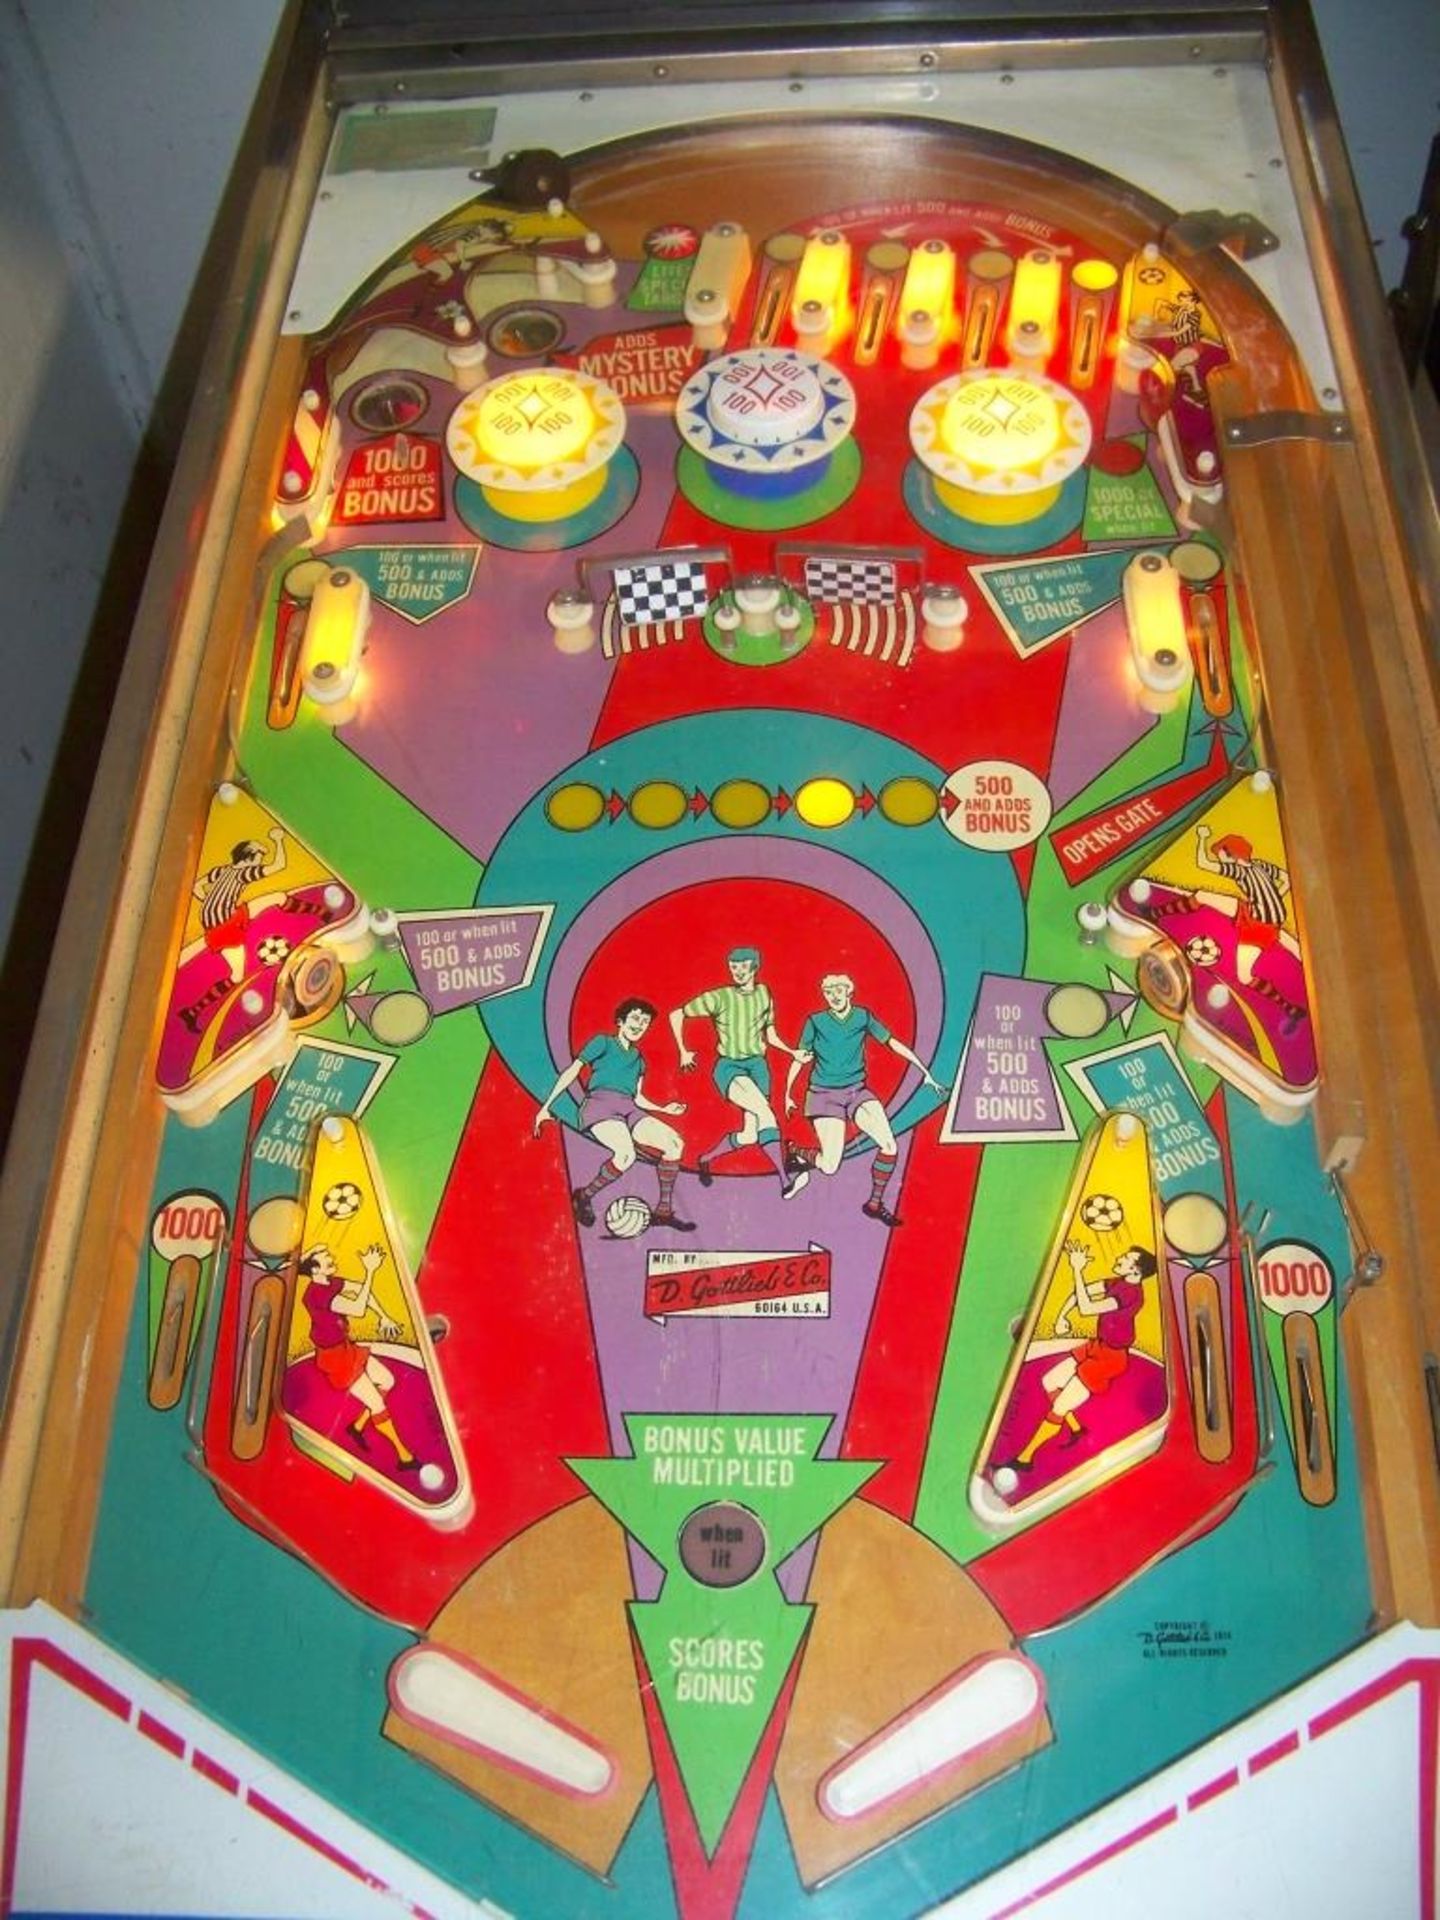 SOCCER PINBALL MACHINE ANIMATED BOX GOTTLIEB 1975 Item is in used condition. Evidence of wear and - Image 8 of 8